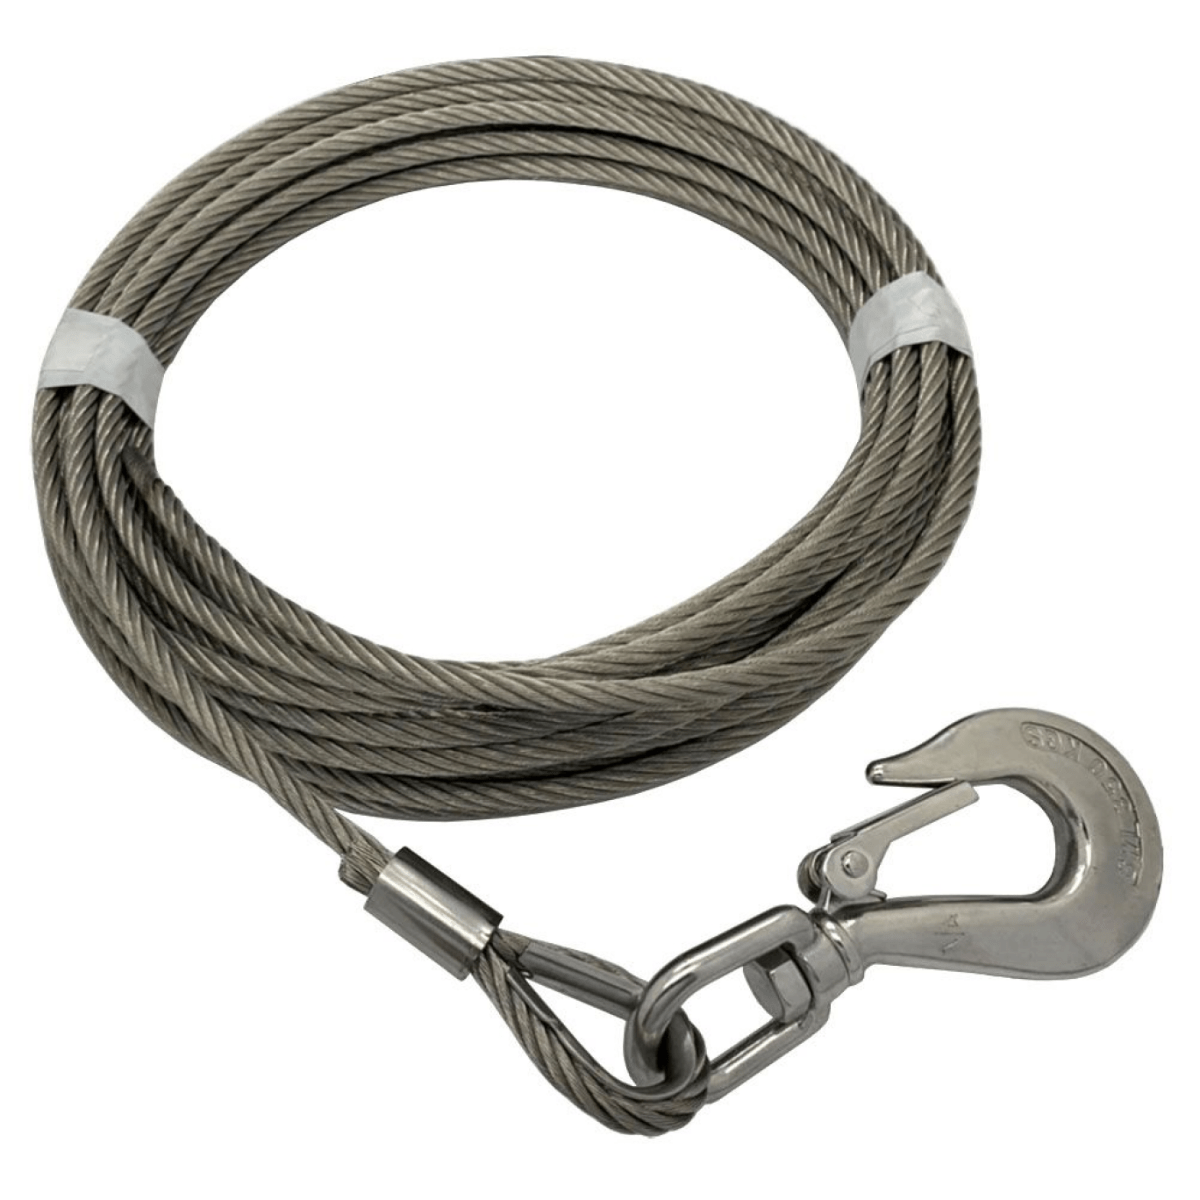 IC Brindle Stainless Steel Wire Rope Winch Cable with Hook - I.C. Brindle